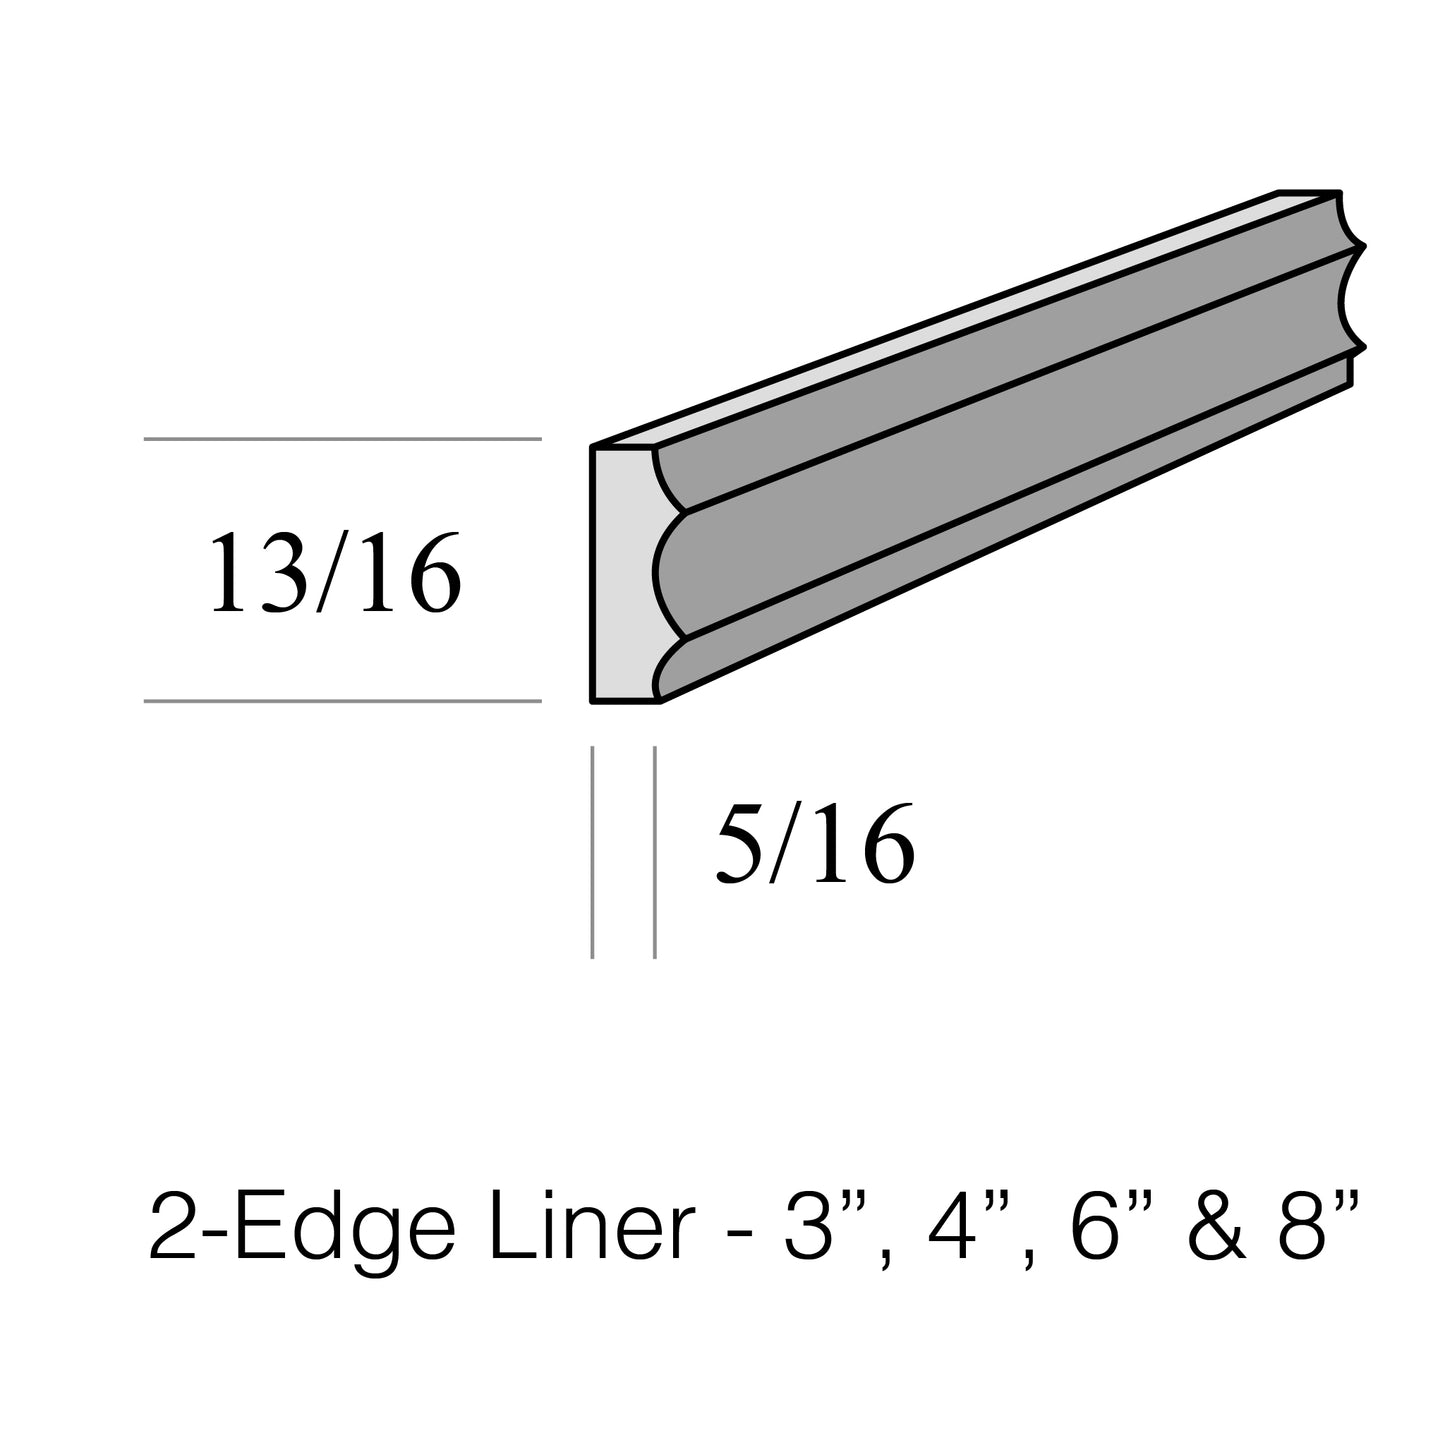 Two-Edge Liner 8"